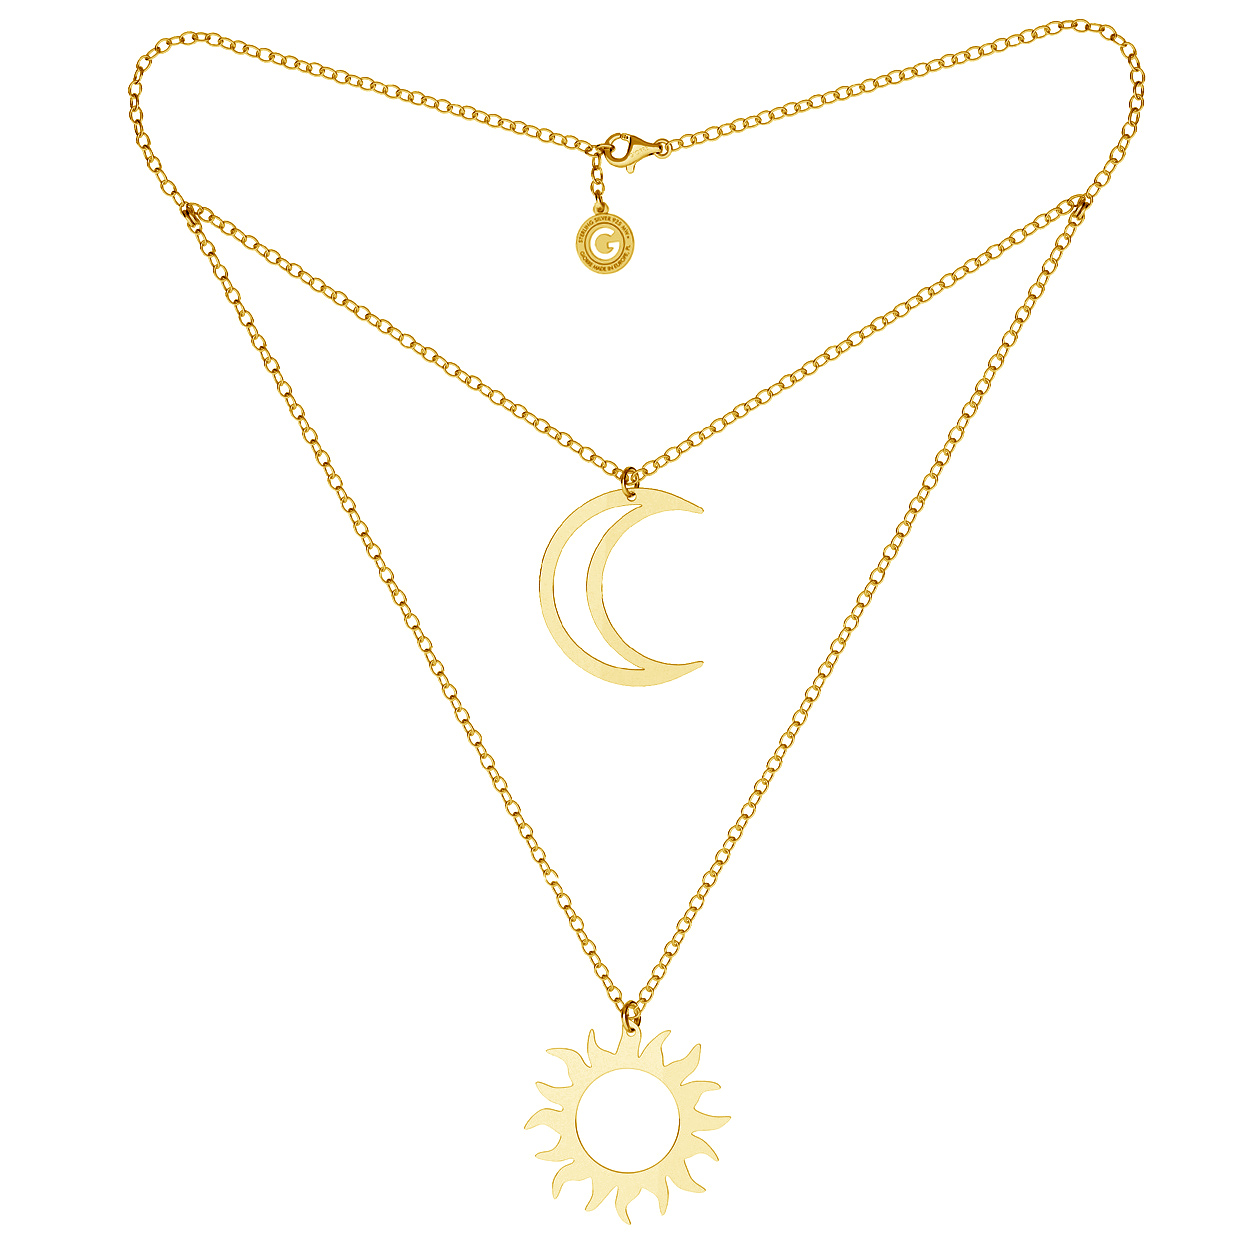 SUN AND CLOUD NECKLACE STERLING SILVER 925